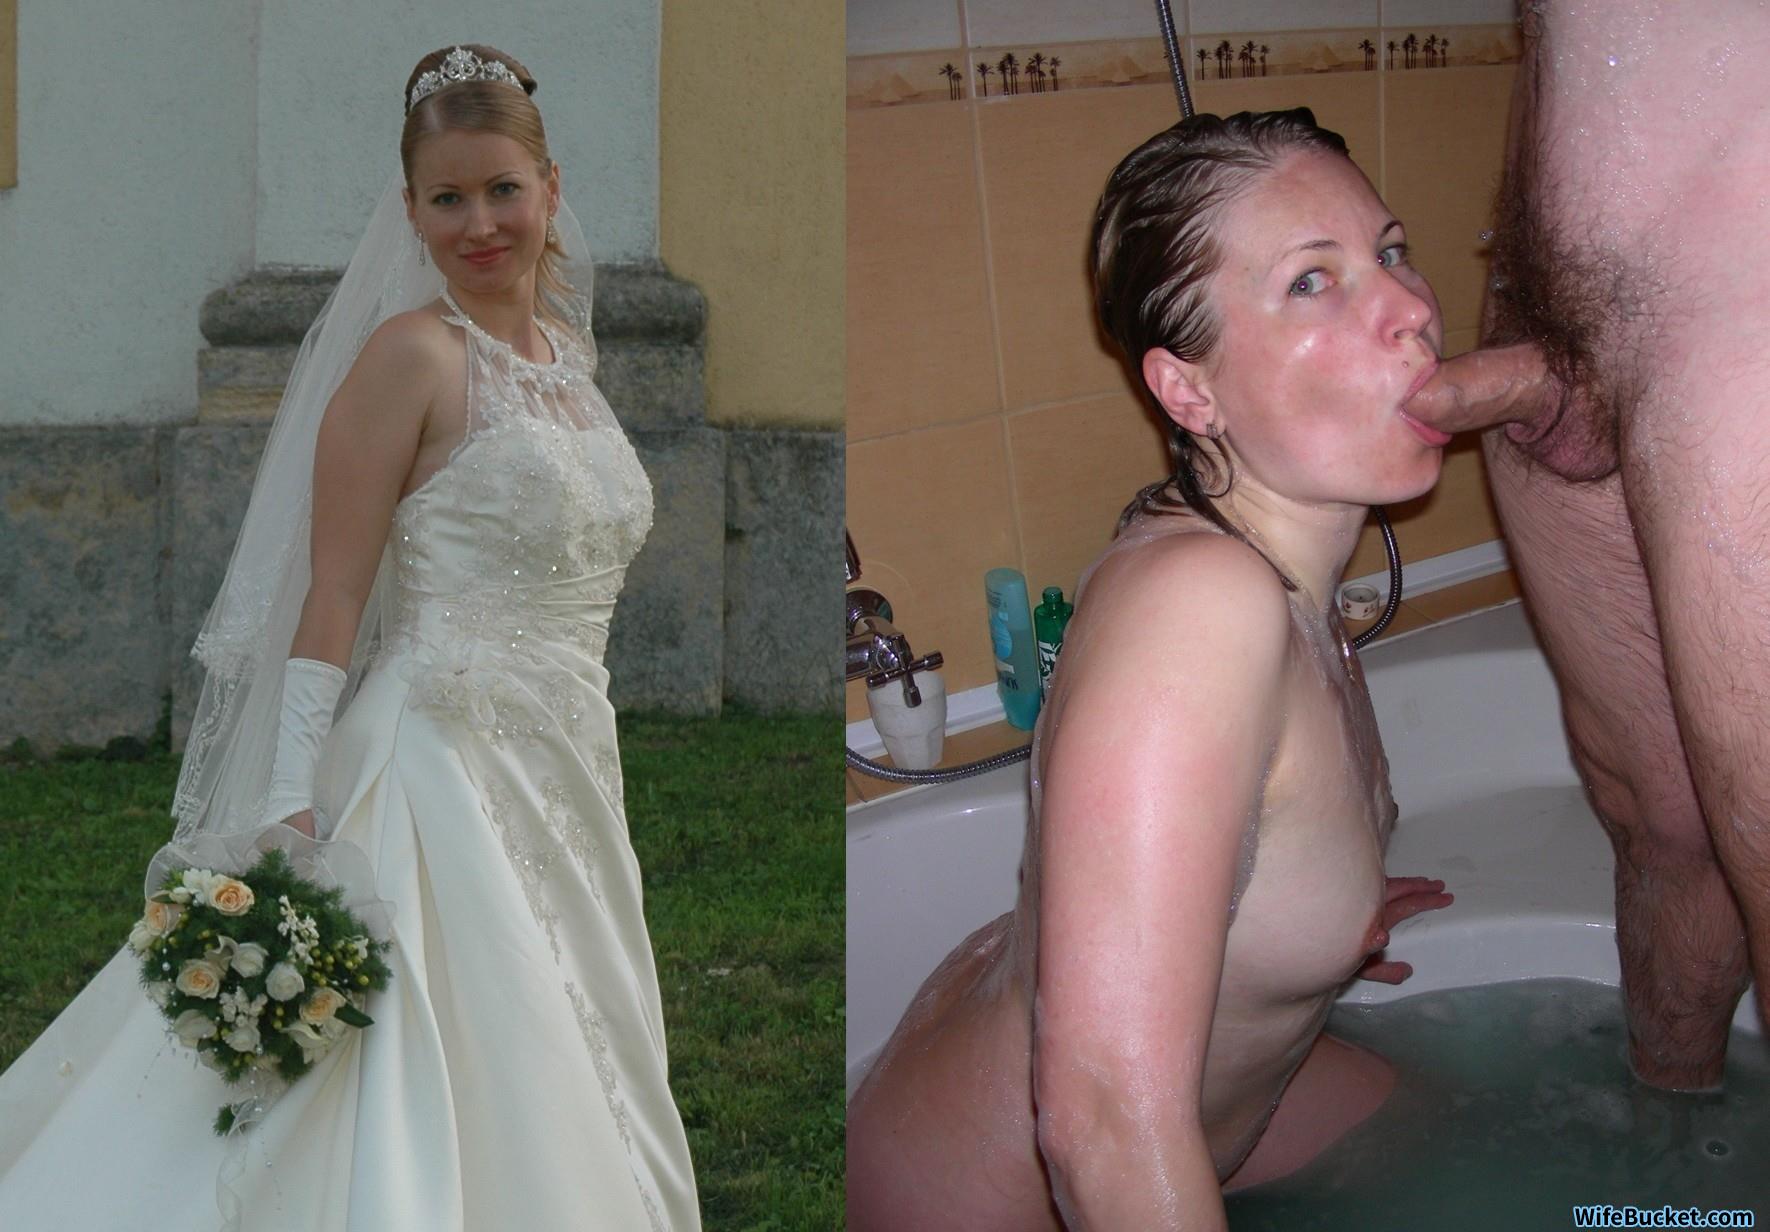 Before-after nudes of sexy amateur brides! Some home porn, too -) photo